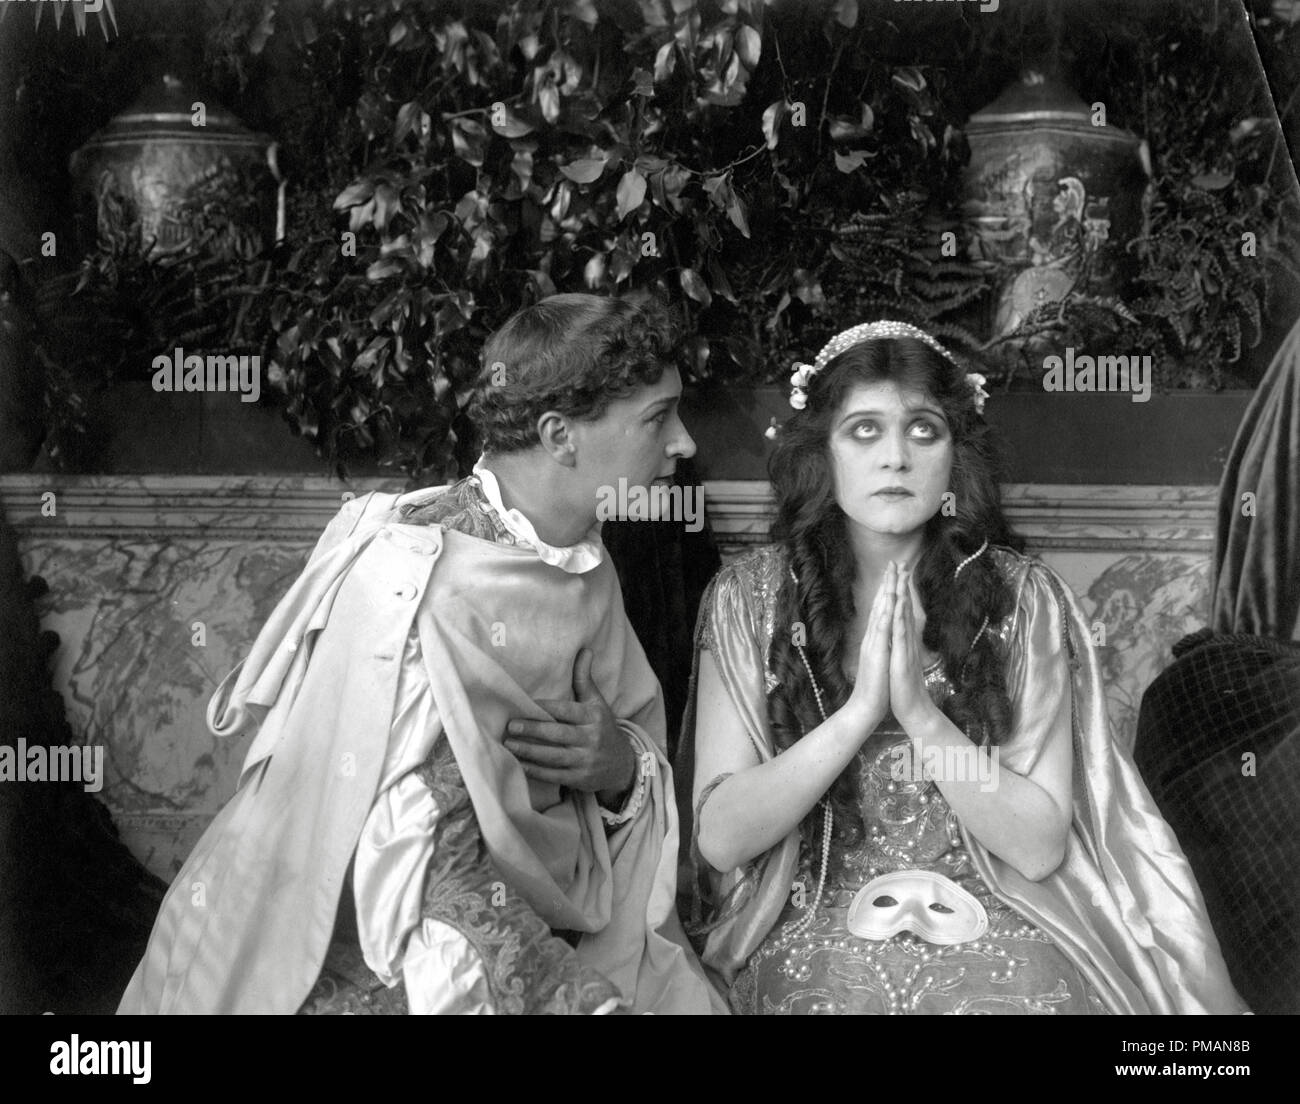 Film Still/Publicity Still of 'Romeo and Juliet'  Harry Hillard, Theda Bara 1916 Fox Film  Cinema Publishers Collection - No Release - For Editorial Use Only File Reference # 33505 413THA Stock Photo